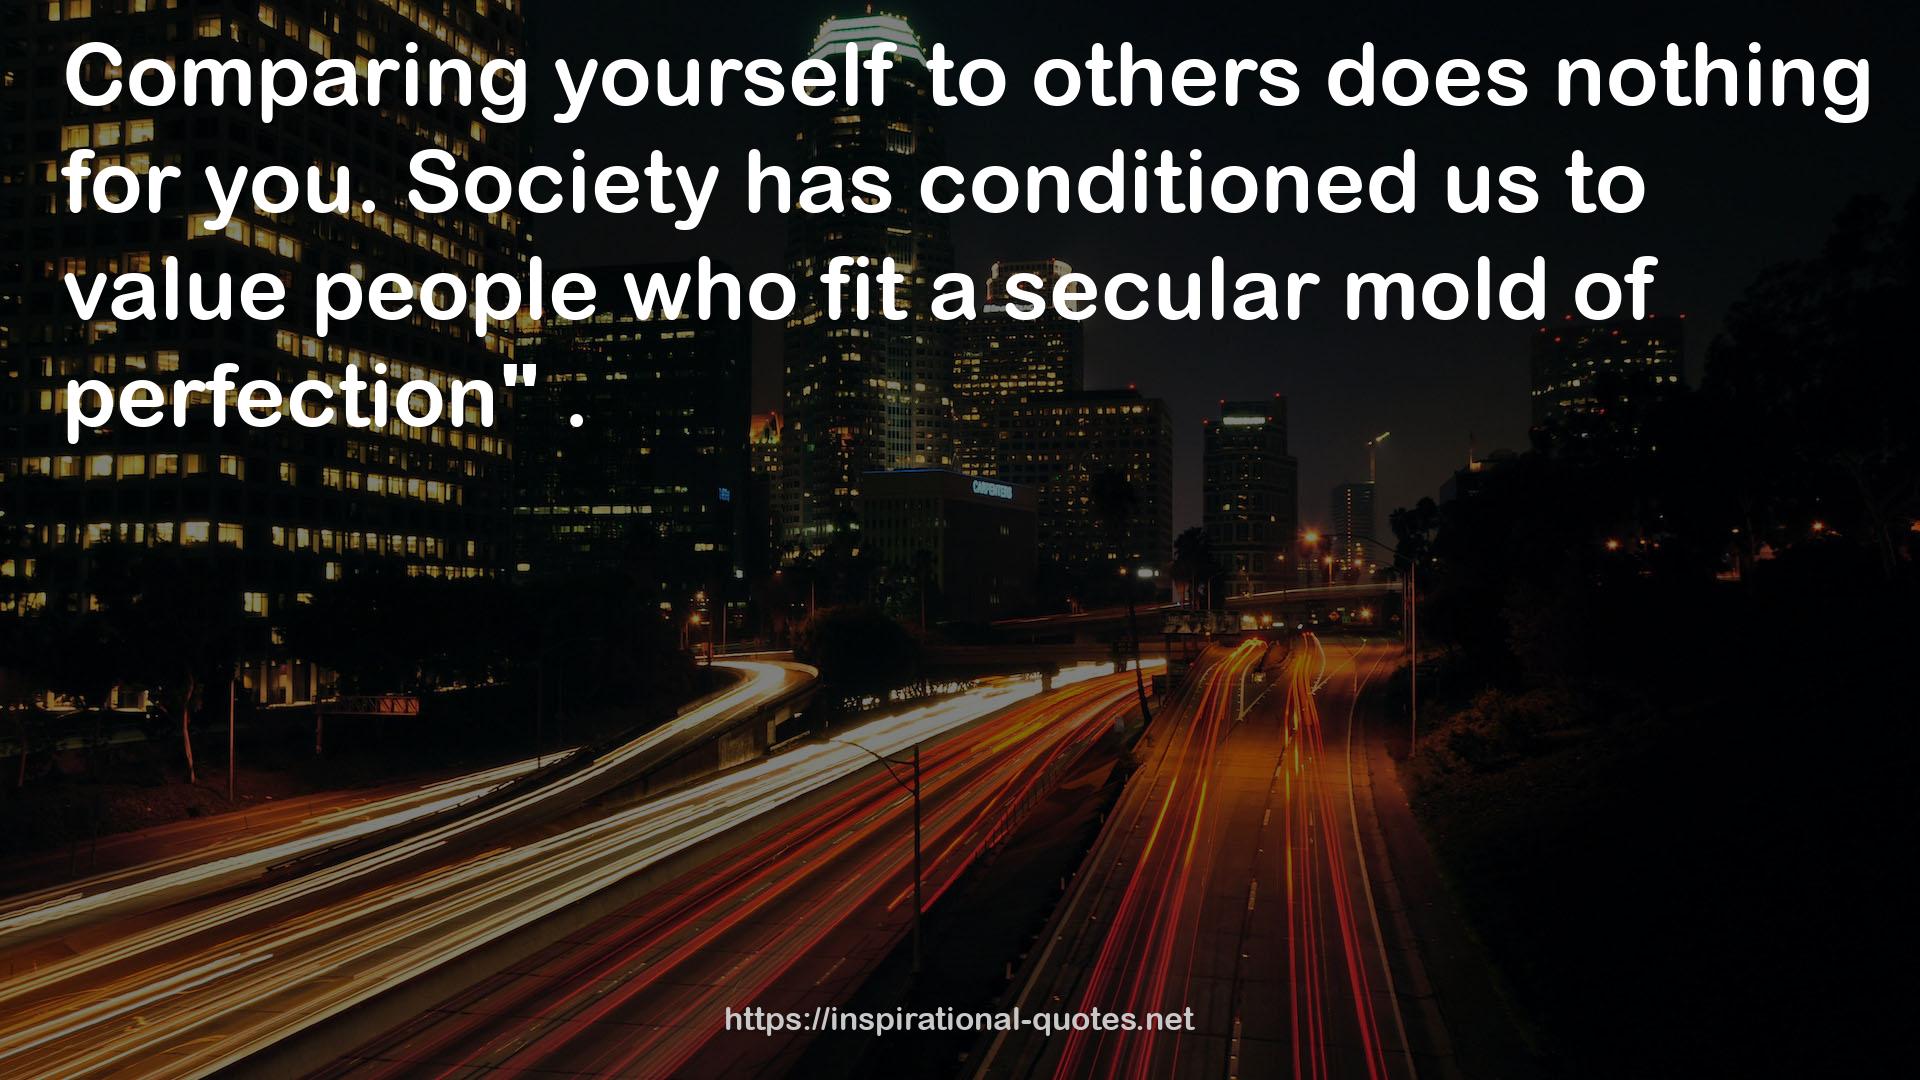 a secular mold  QUOTES